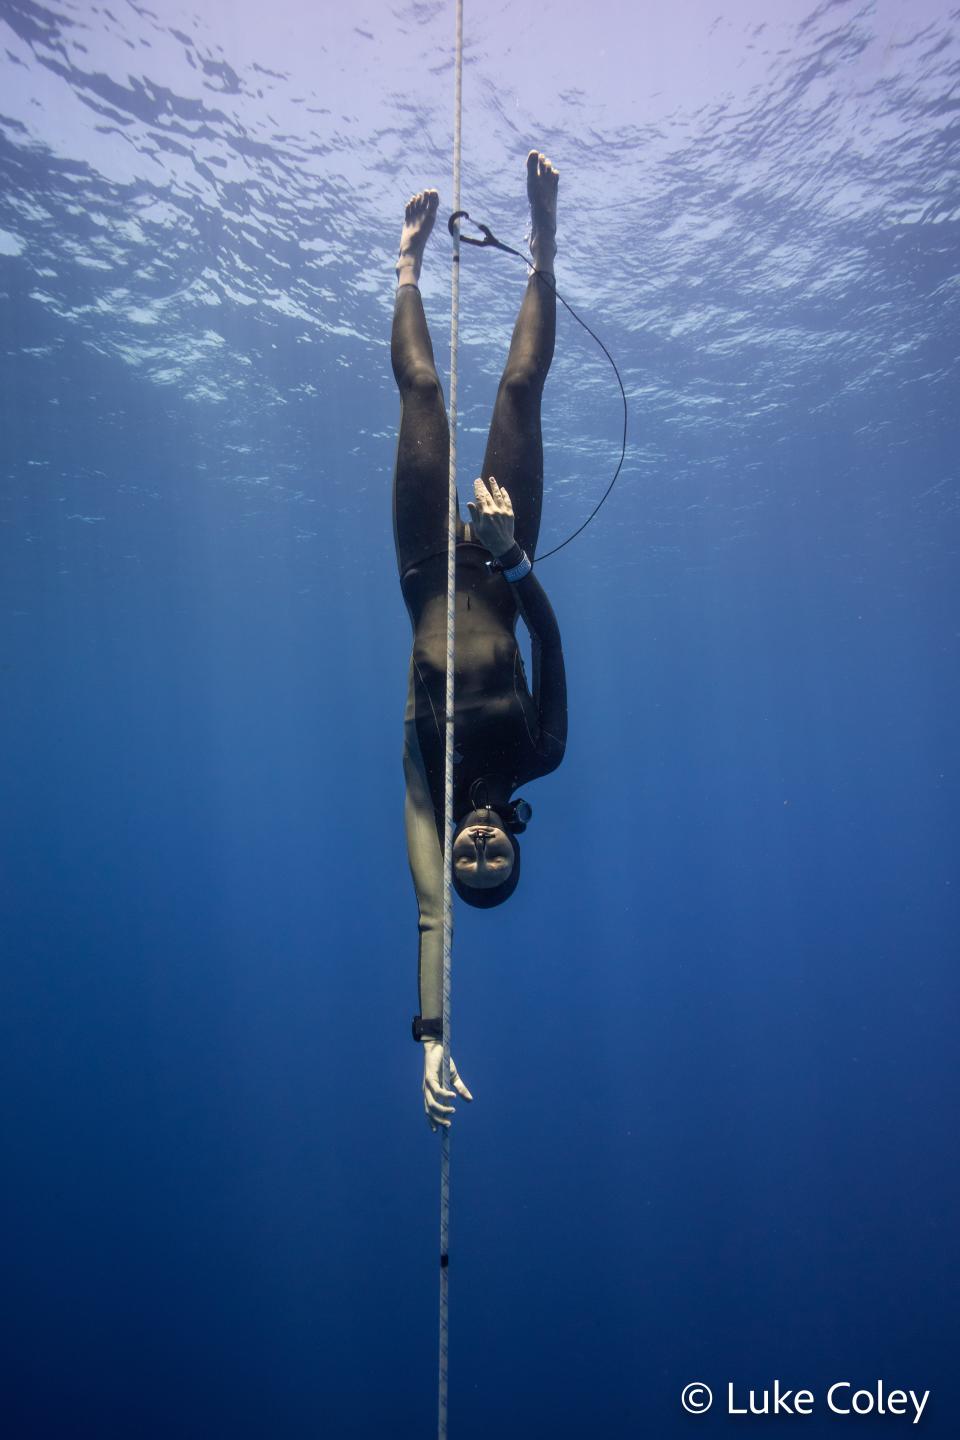 Amber Bourke of Brisbane, Australia is pictured on a free dive, in which she holds her breath as she swims hundreds of feet below the ocean's surface before returning to the top.